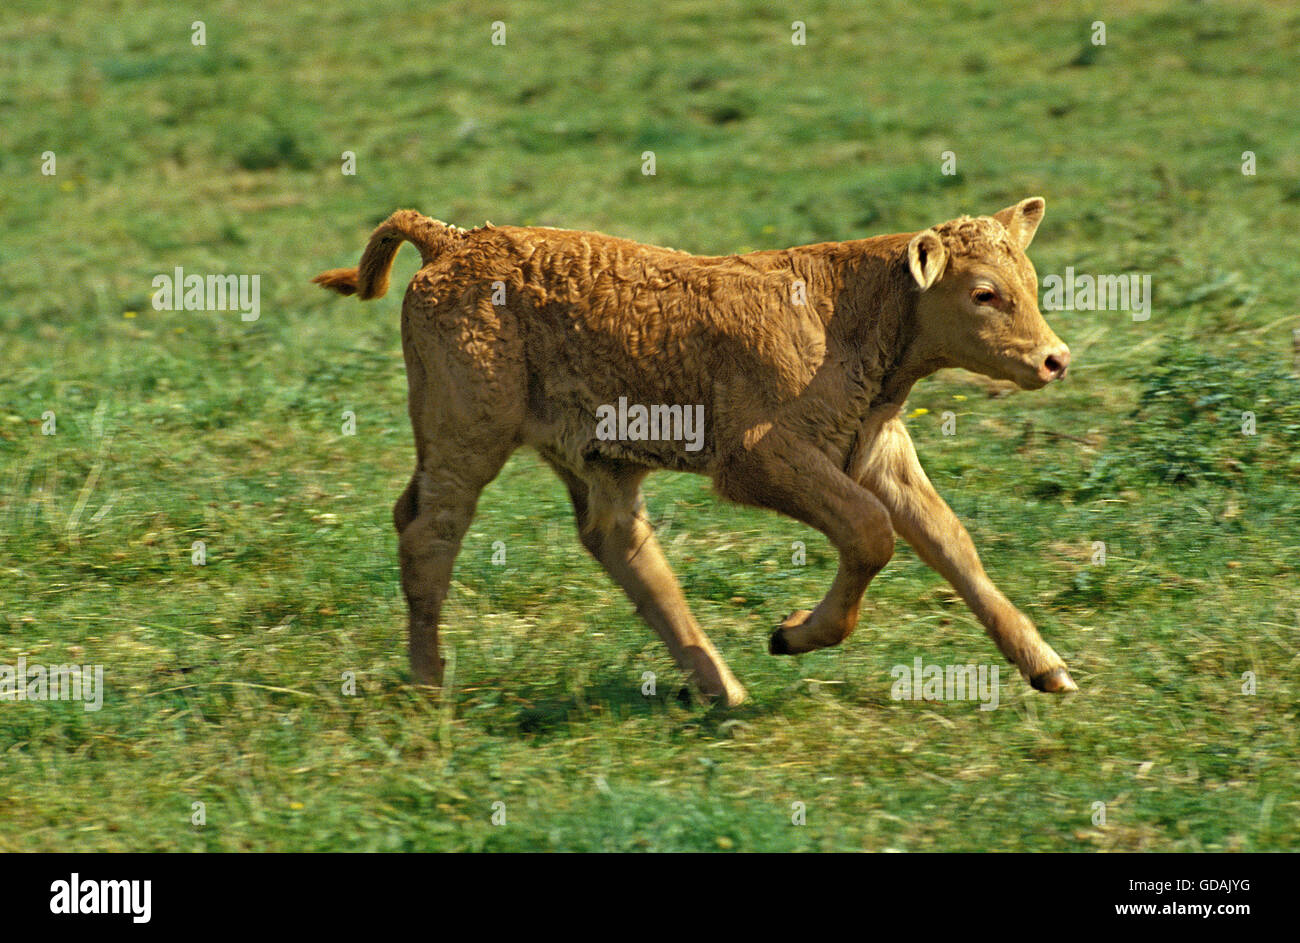 Limousine Domestic Cattle, a French Breed, Calf running Stock Photo